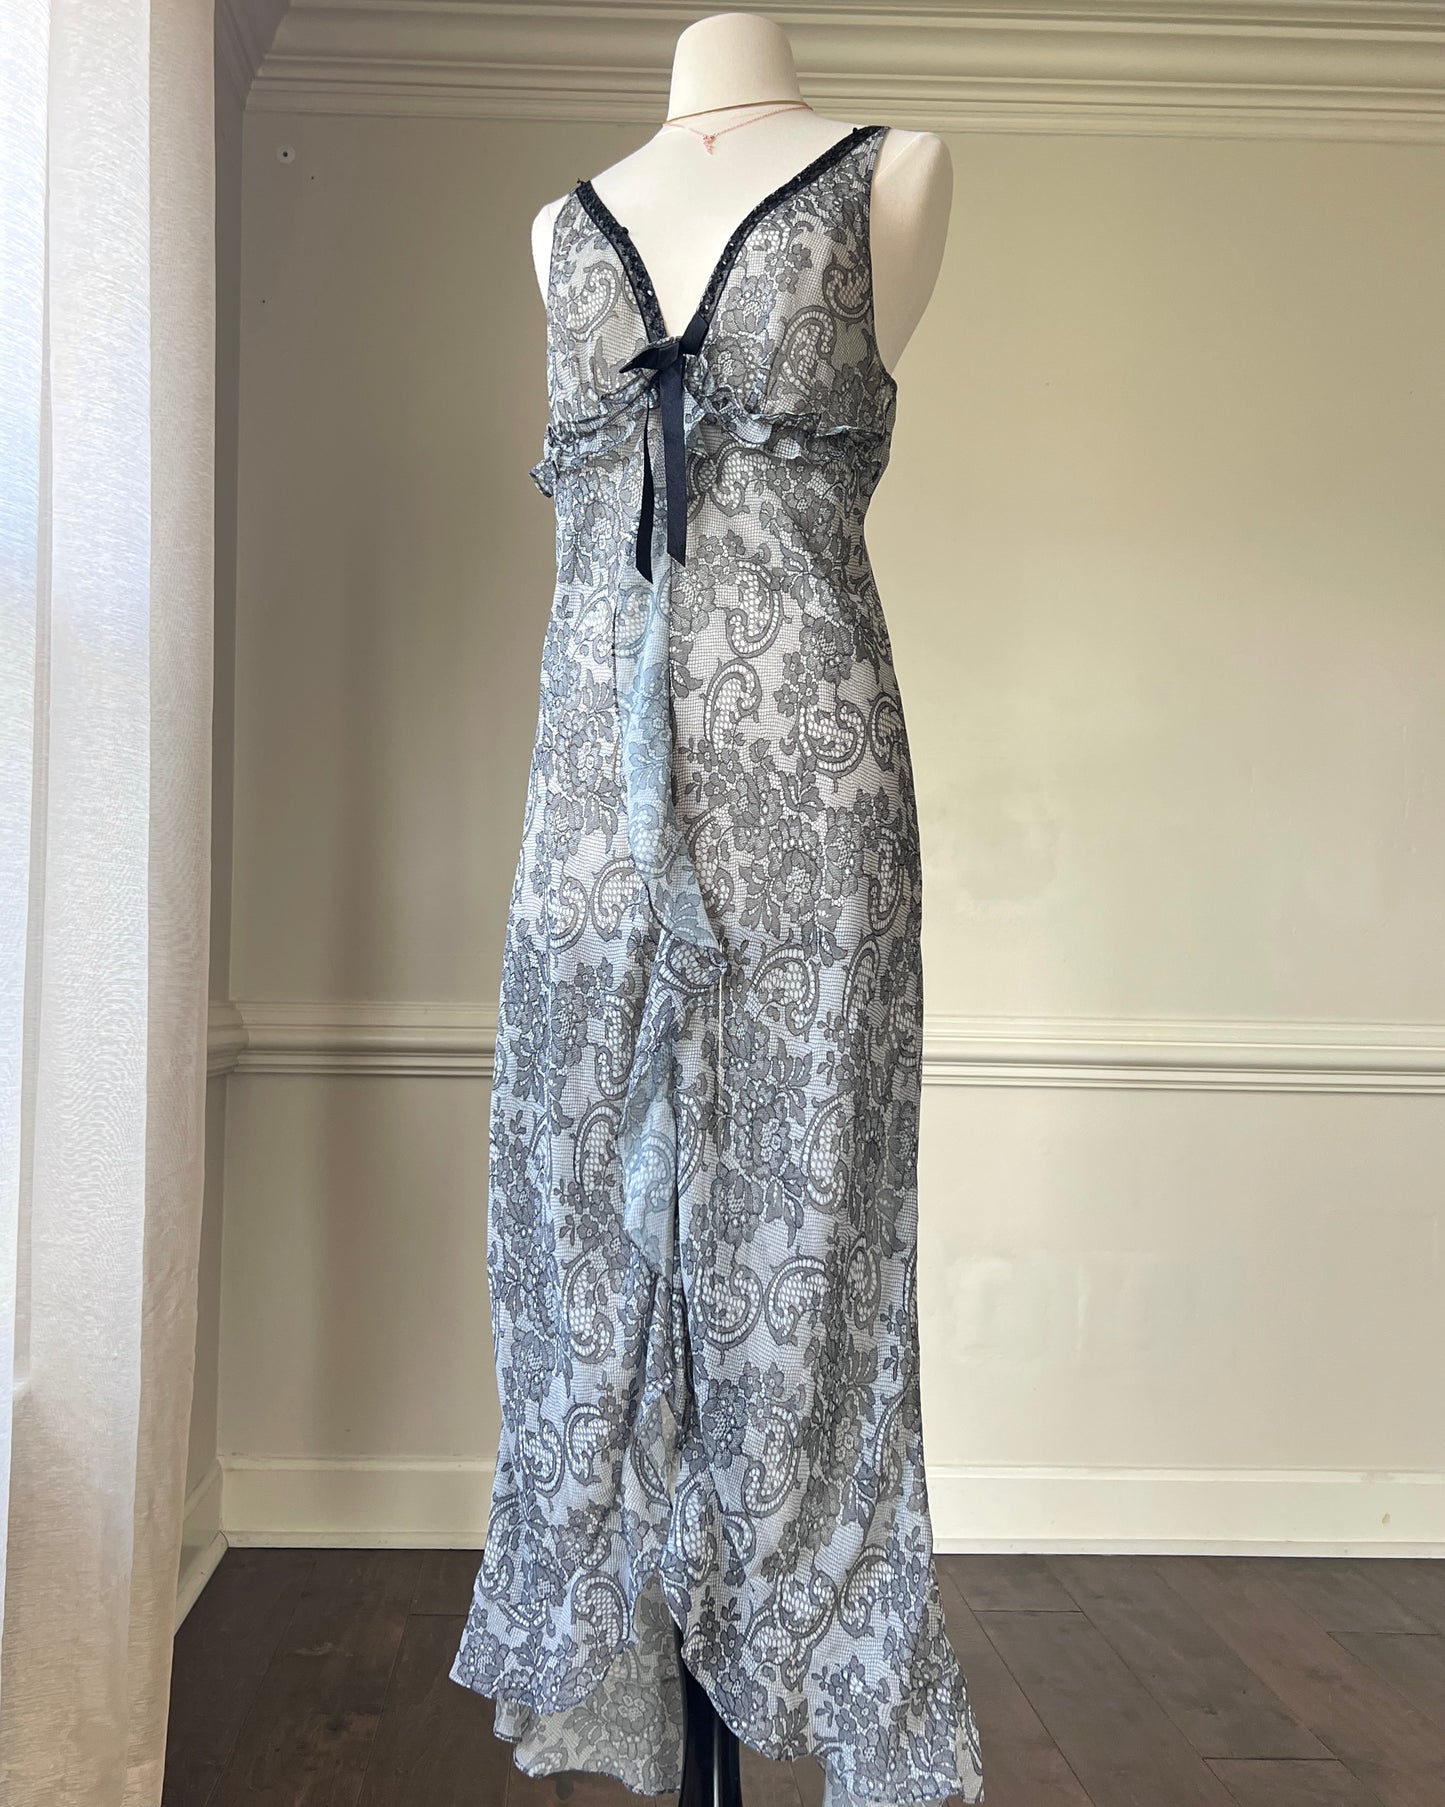 Eblin’s Sheer Maxi Dress featuring Overall Paisley Pattern with Ruffled Split Detail